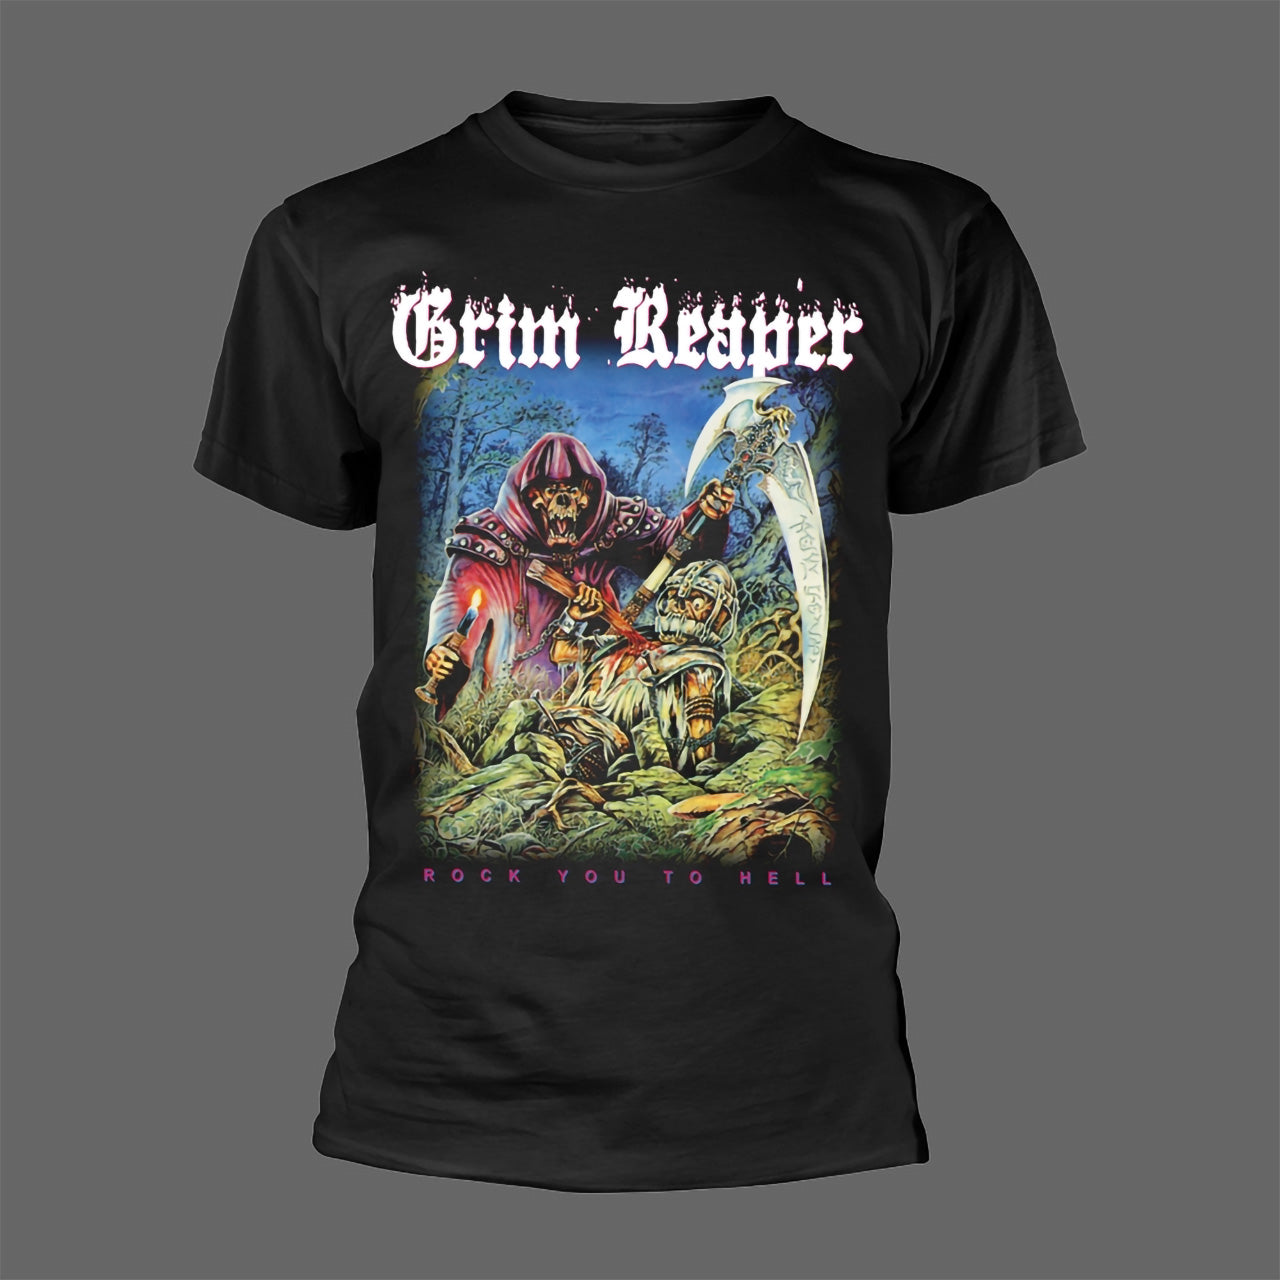 Grim Reaper - Rock You to Hell (T-Shirt)